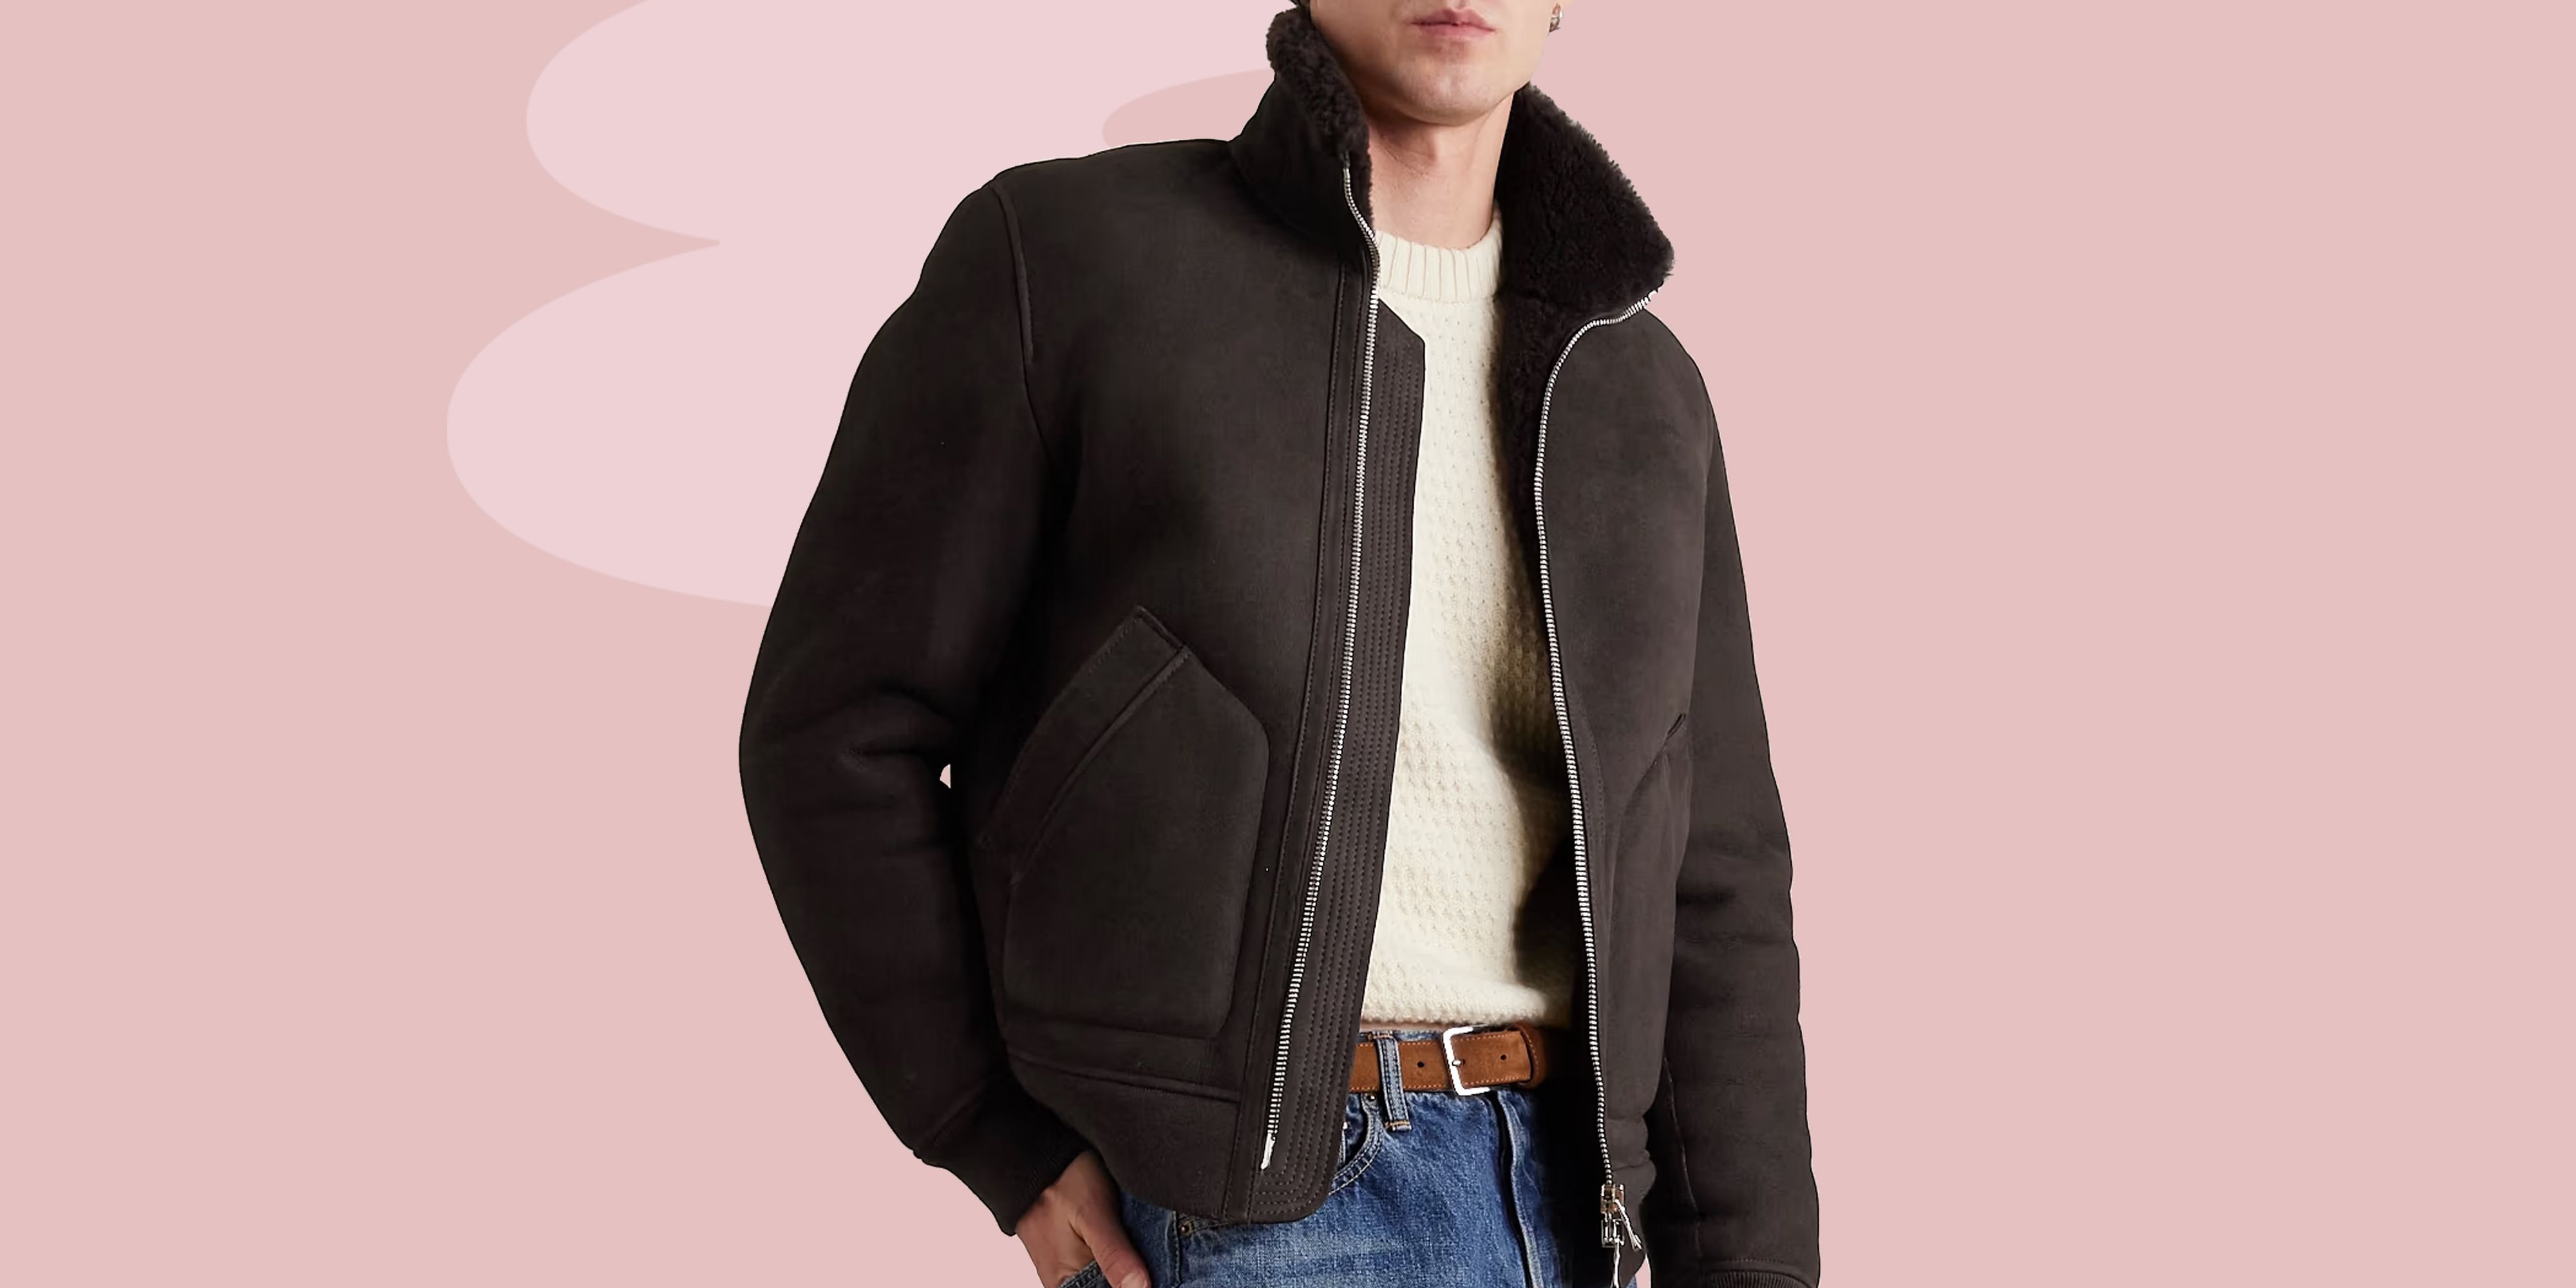 Man Up to This Season's 11 Best Shearling Jackets